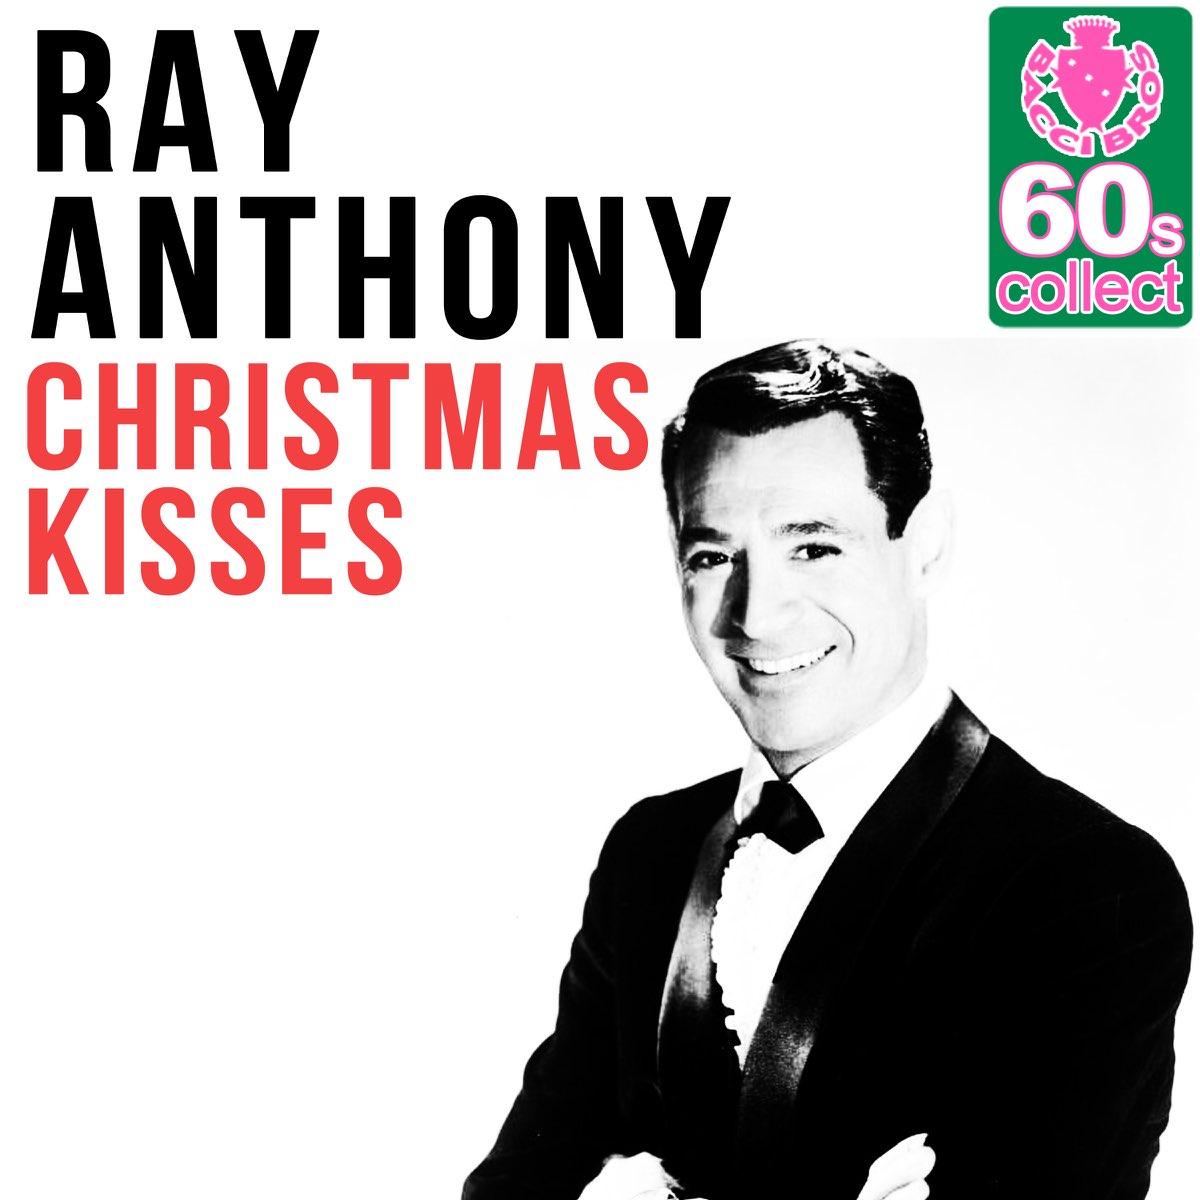 Christmas Kisses (Remastered) - Single by Ray Anthony on Apple Music